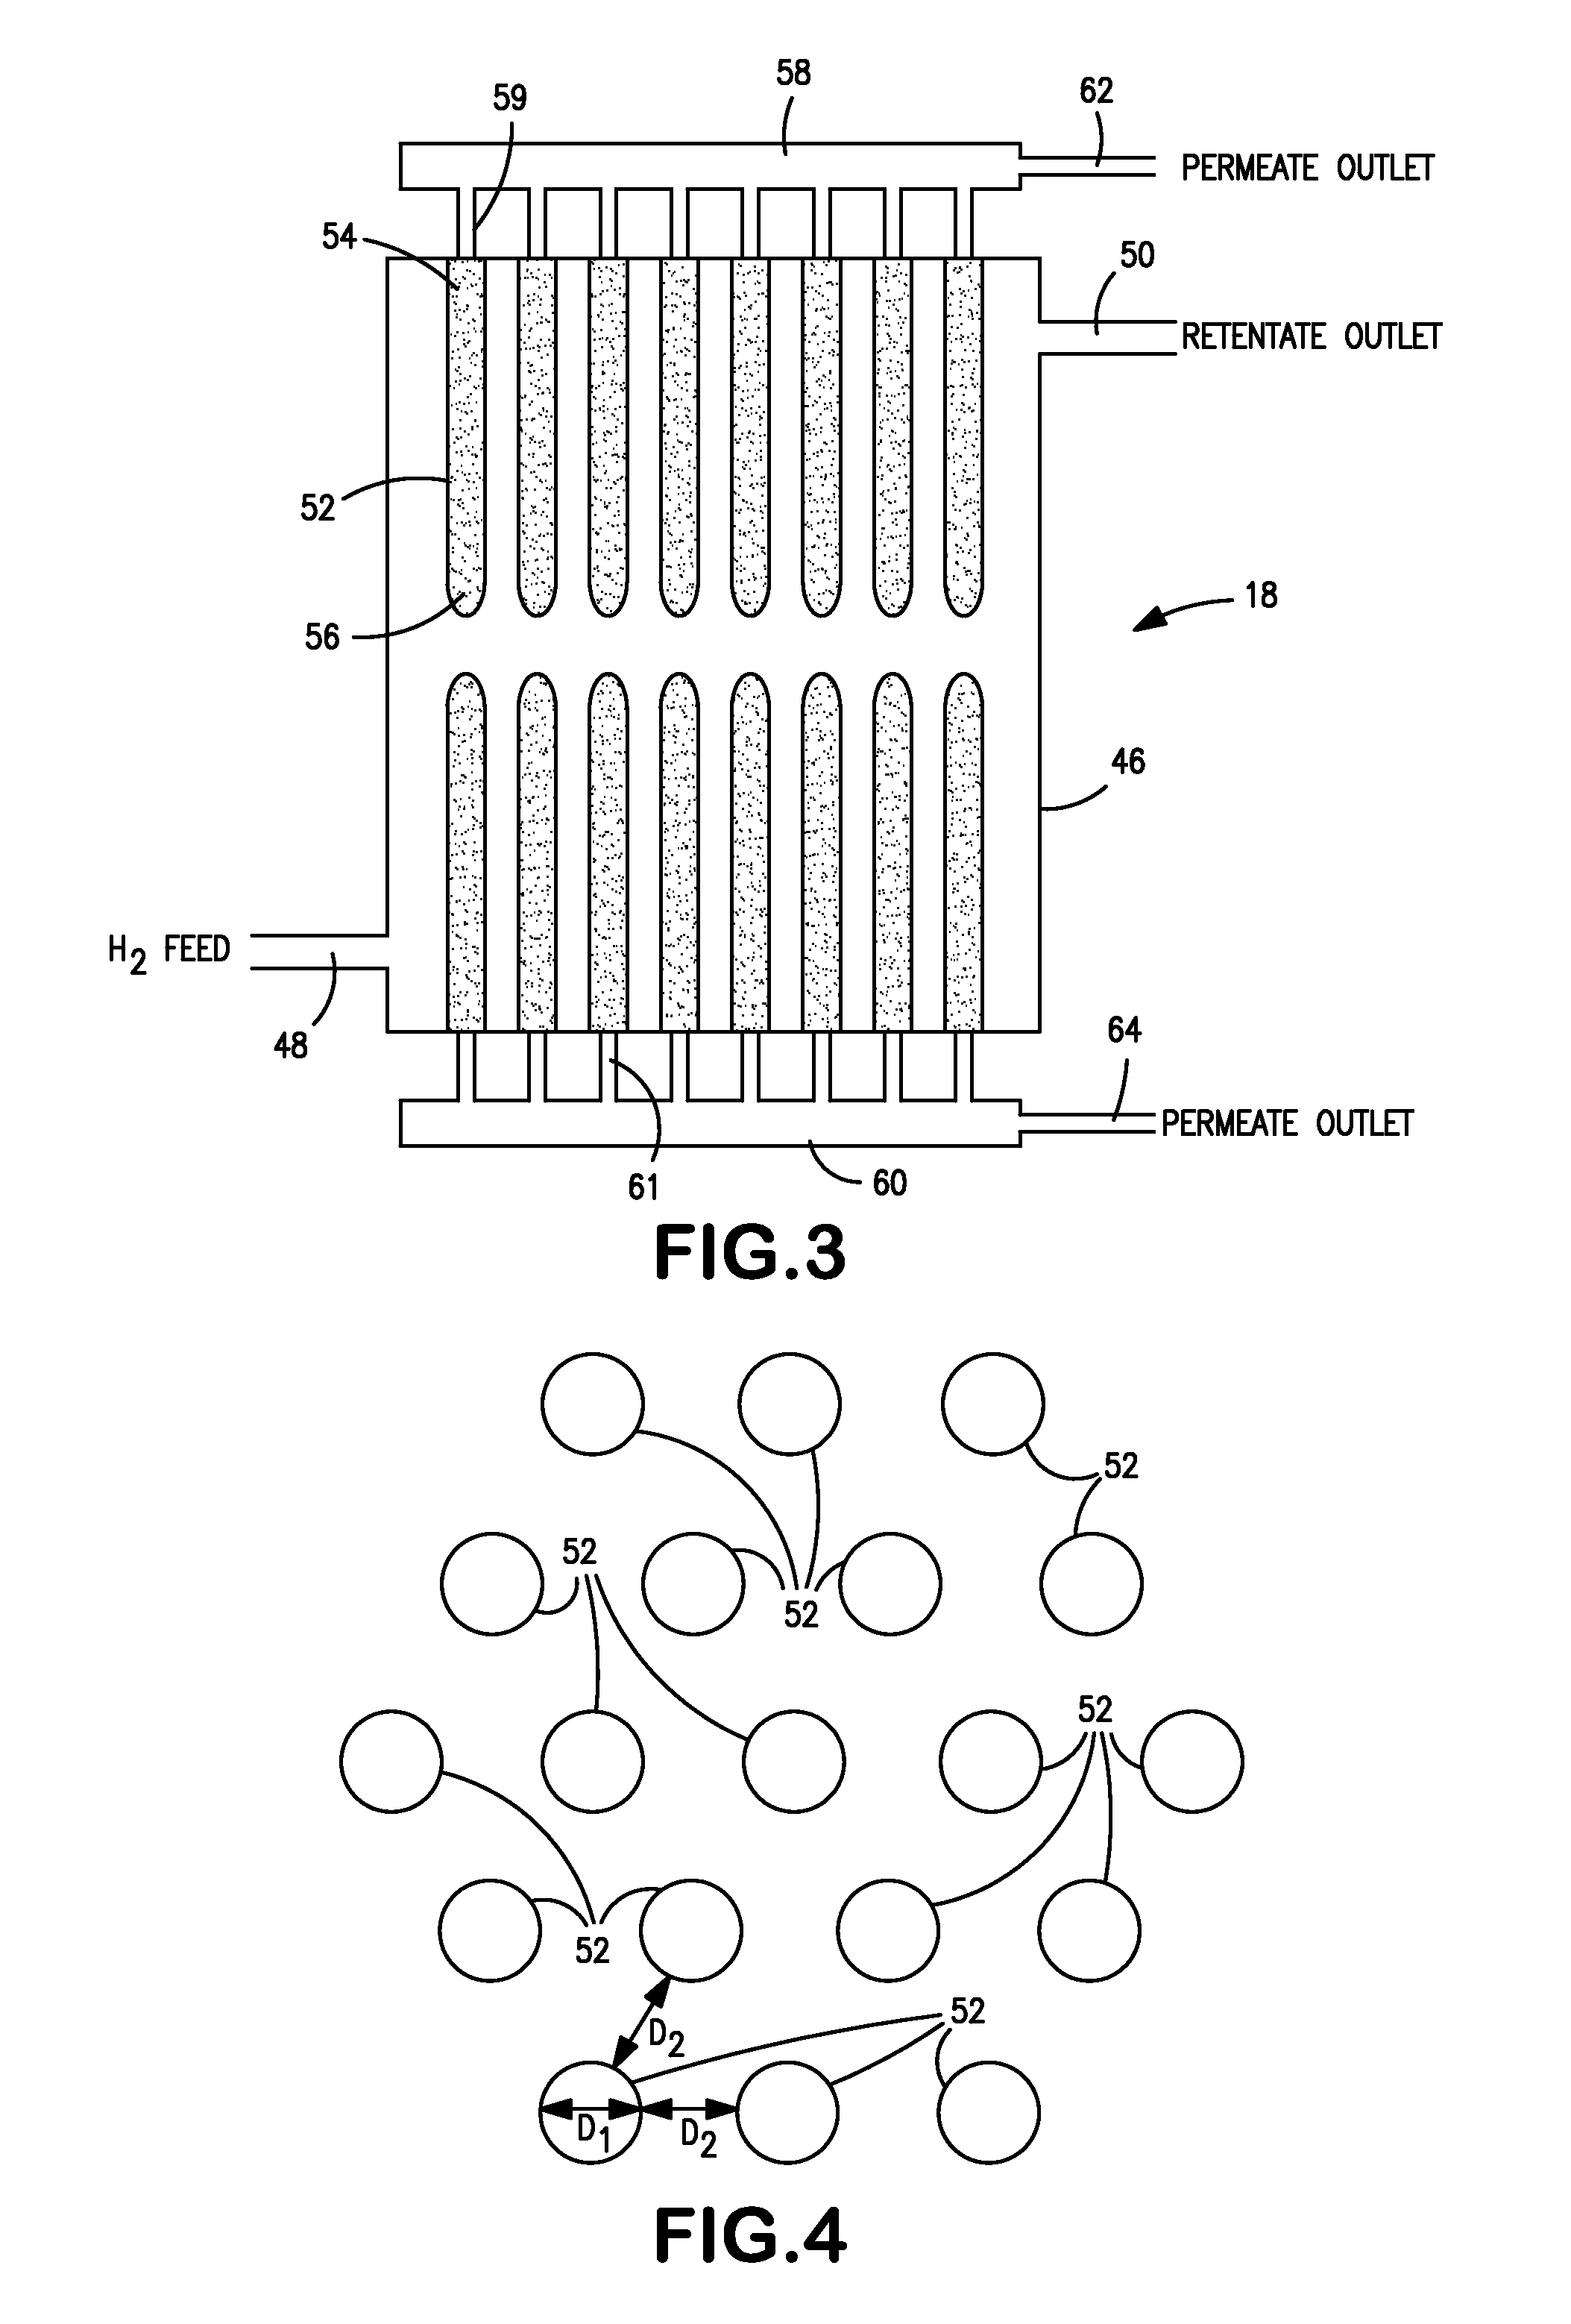 Hydrogen purification for fuel cell vehicle